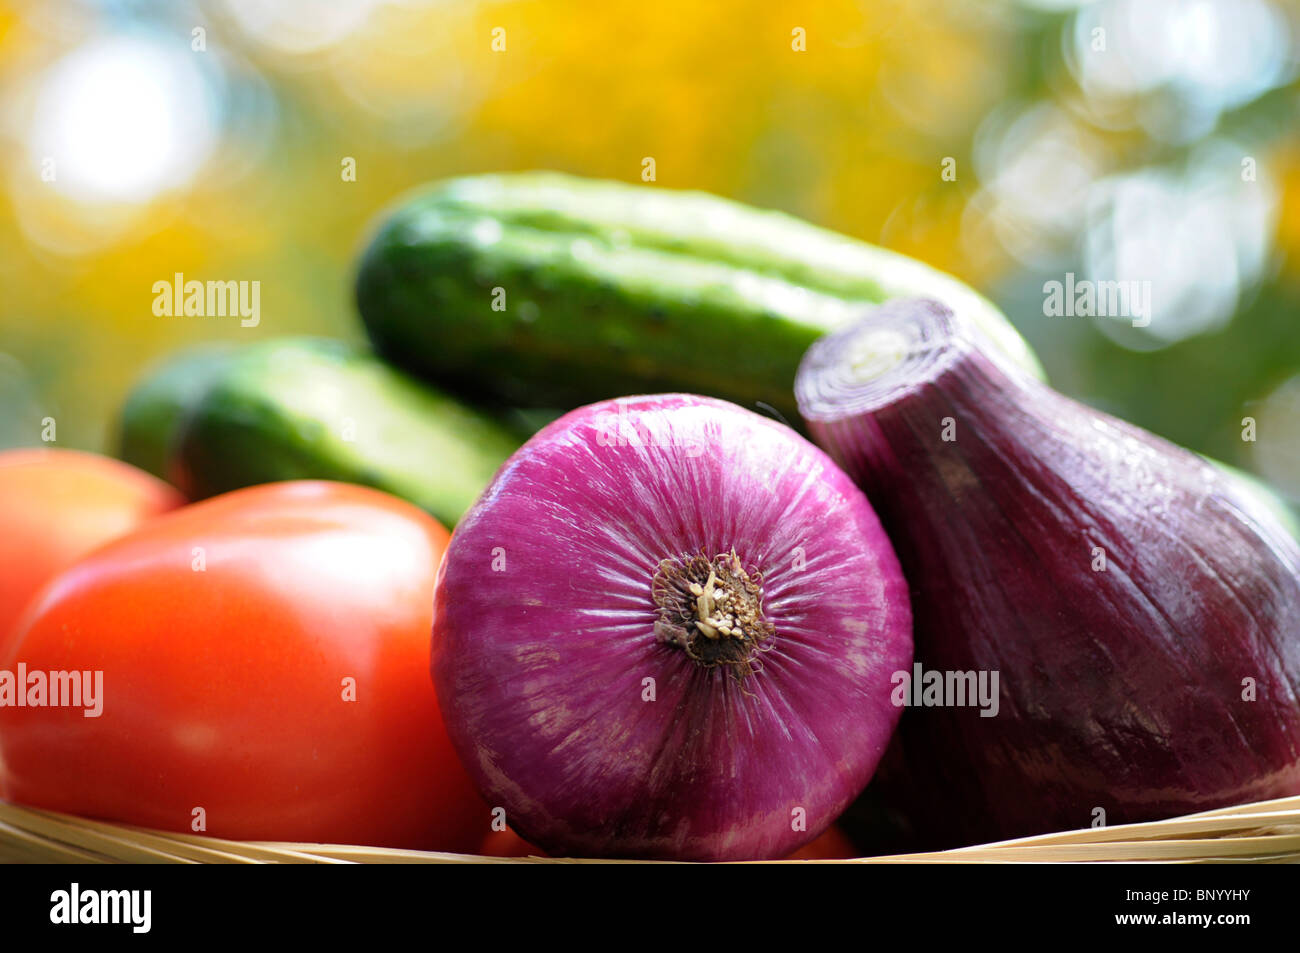 Vegetables, Raw - Red Onion, Cucumbers, Tomatoes Stock Photo